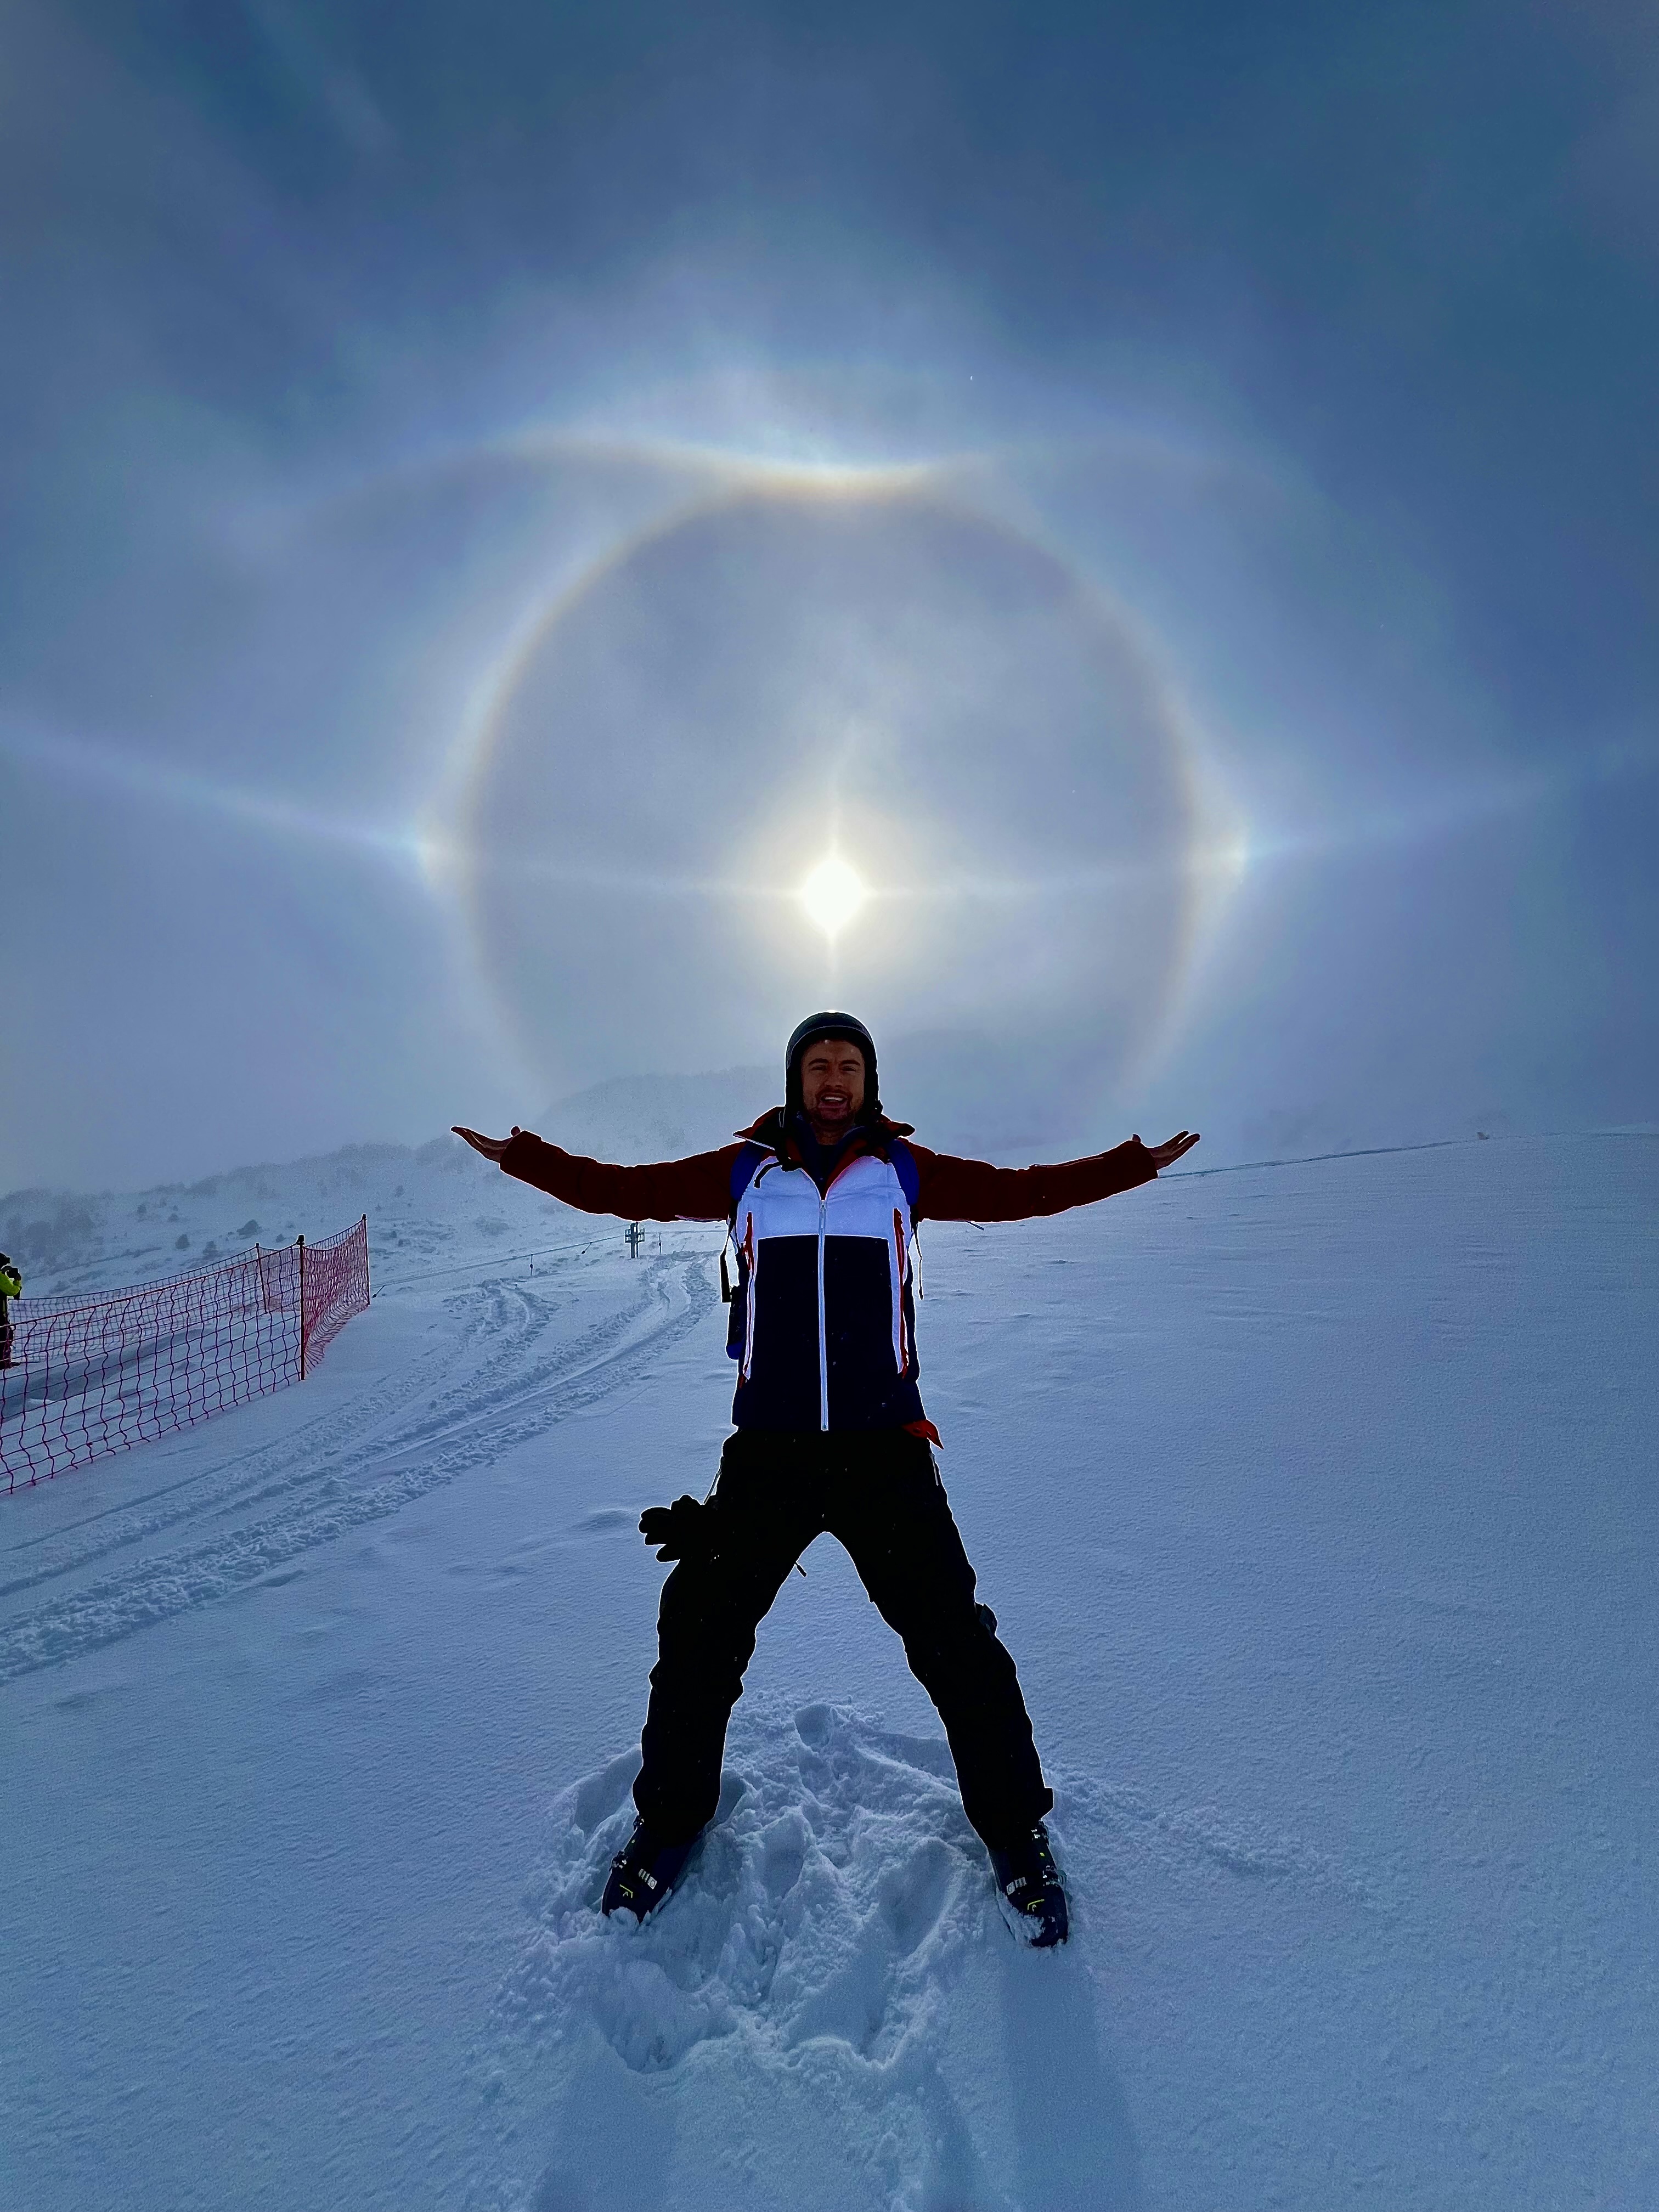 Sun halo: Phenomenon created by tiny ice crystals filling the air.